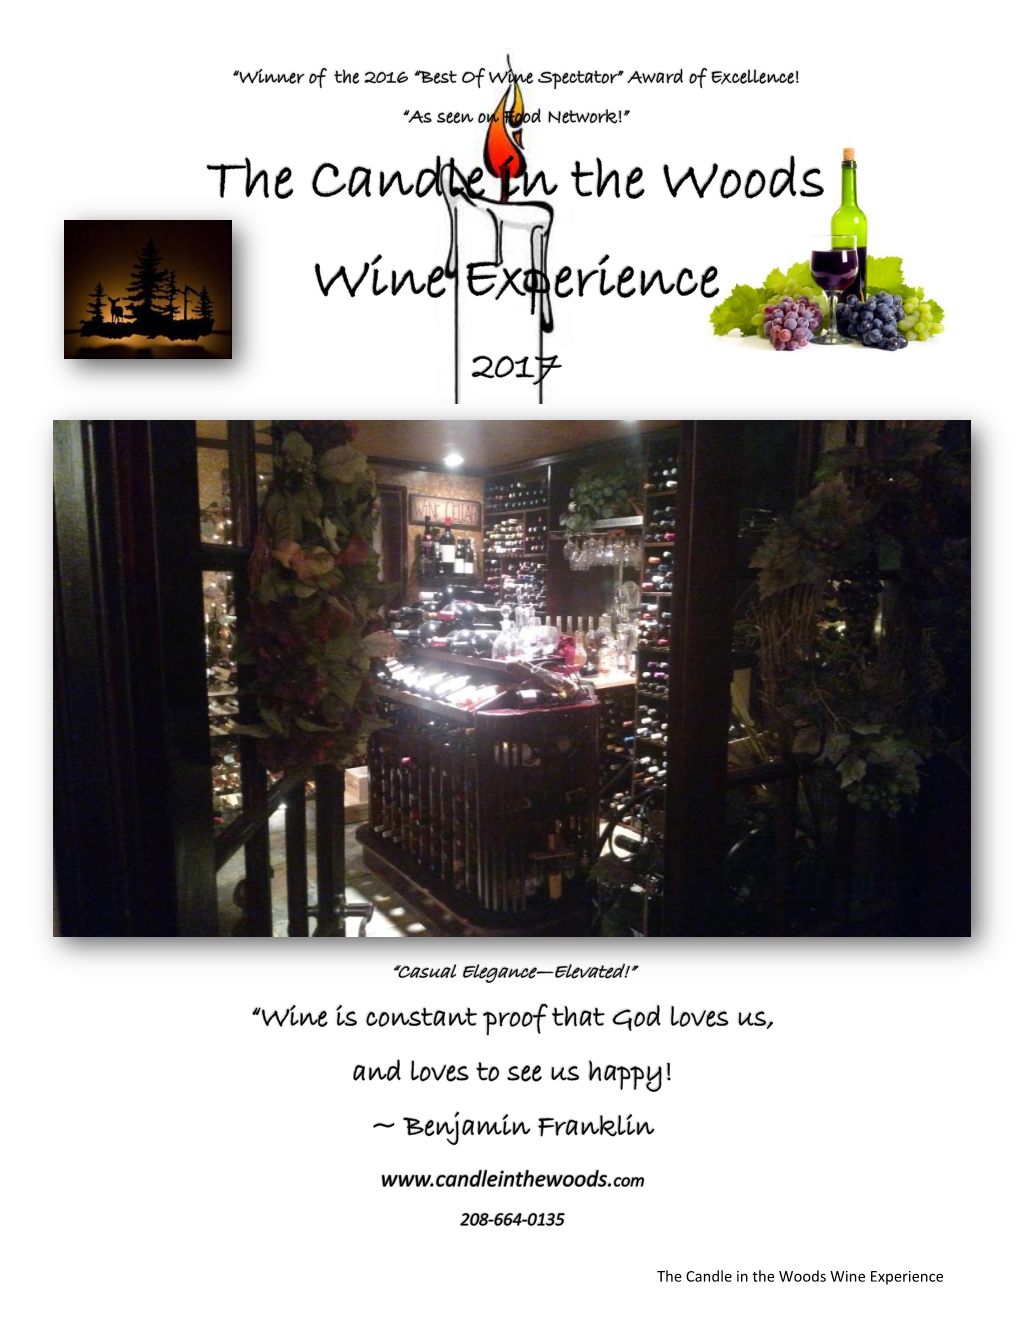 The Candle in the Woods Wine Experience “Eclectic!” “Wow!’ “An Amazing Collection!” ~ Sam L, American Master Sommelier